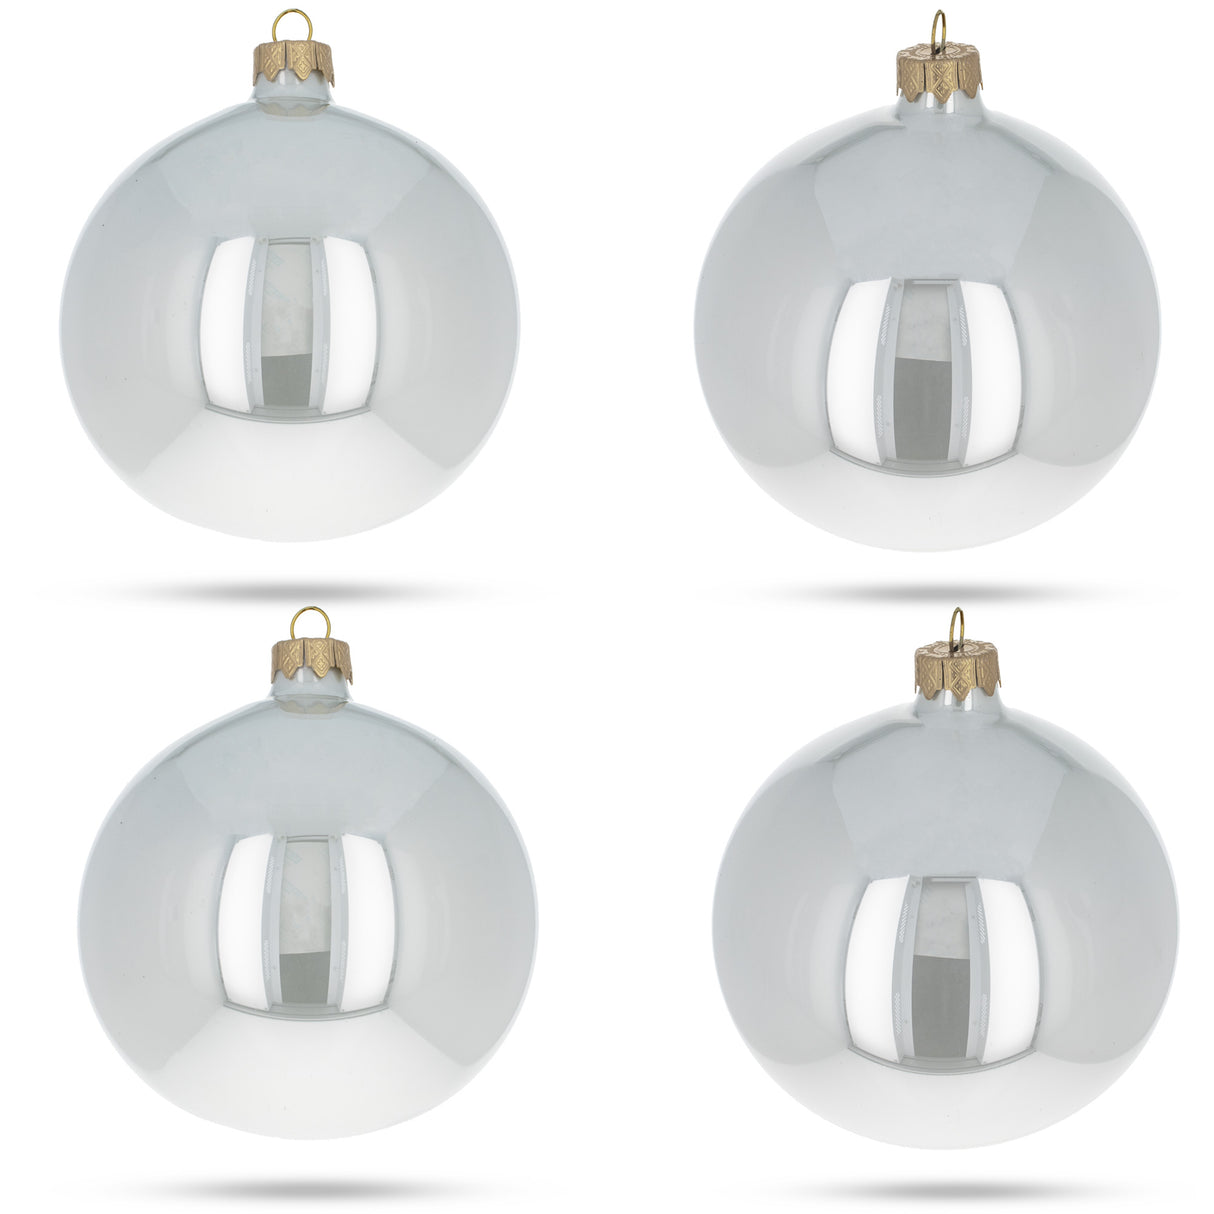 Set of 4 Glossy White Glass Ball Christmas Ornaments 4 Inches in White color, Round shape